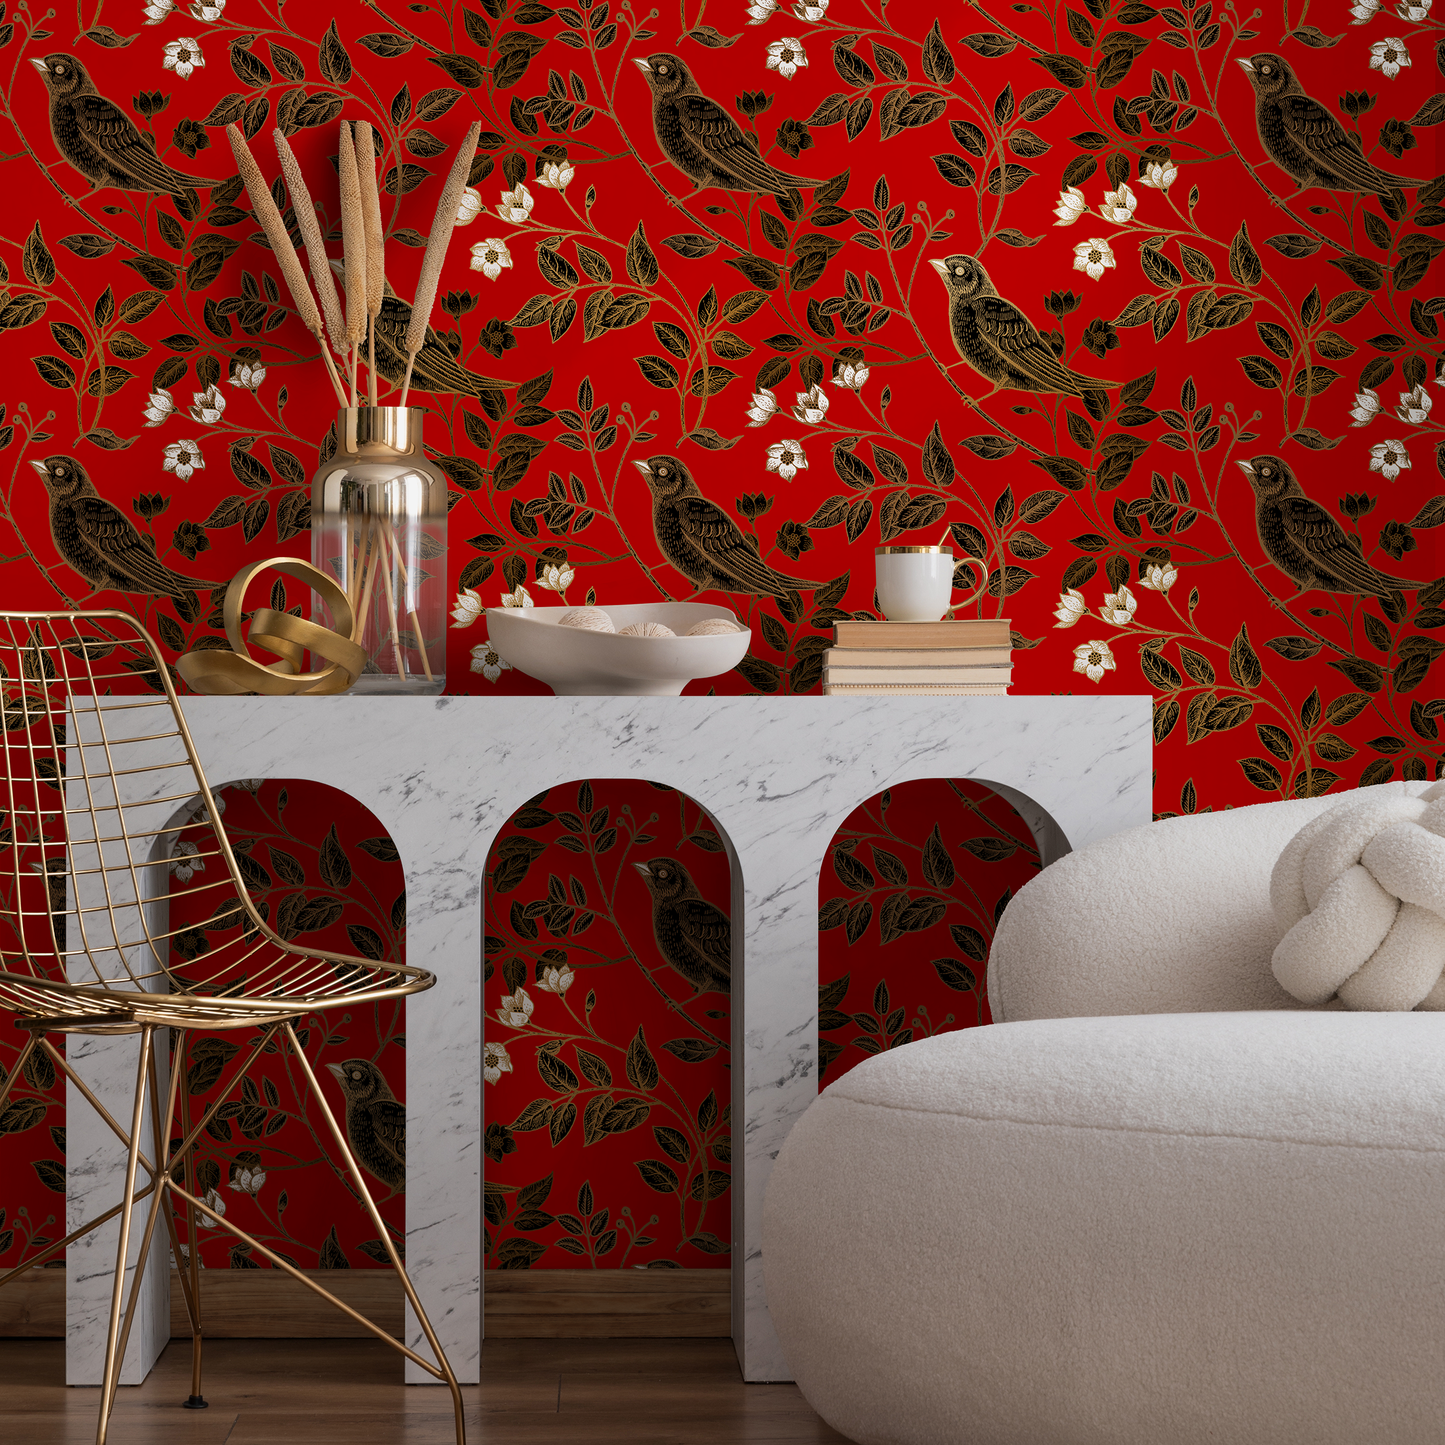 Wallpaper Peel and Stick Wallpaper Removable Wallpaper Home Decor Wall Art Wall Decor Room Decor /  Vintage Red Bird Wallpaper - A924